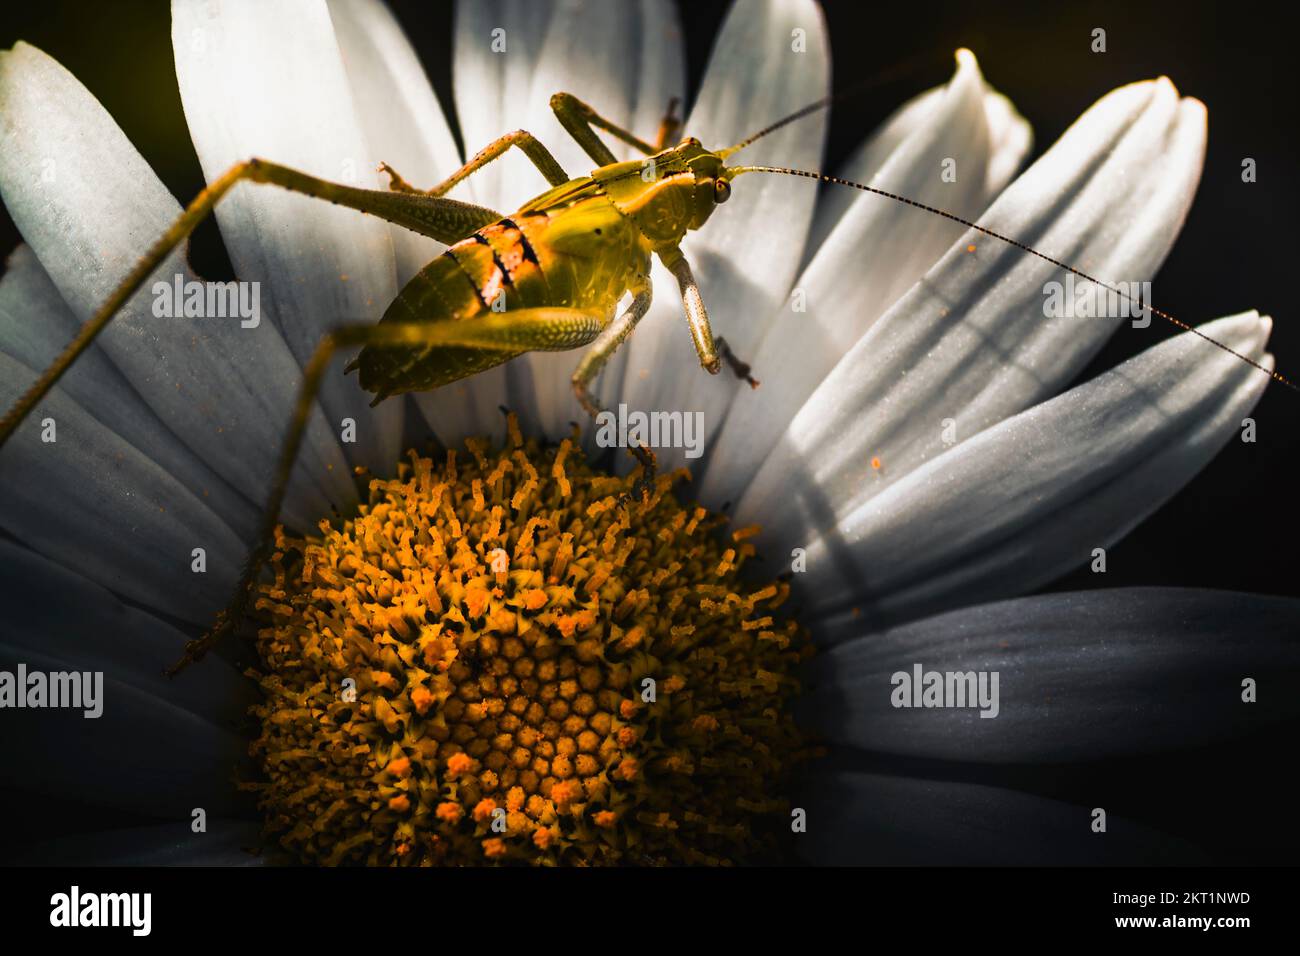 Flora and fauna horizontal close-up on a small green Australian grasshopper standing on the stamen on a yellow daisy flowers. Spring concept Stock Photo